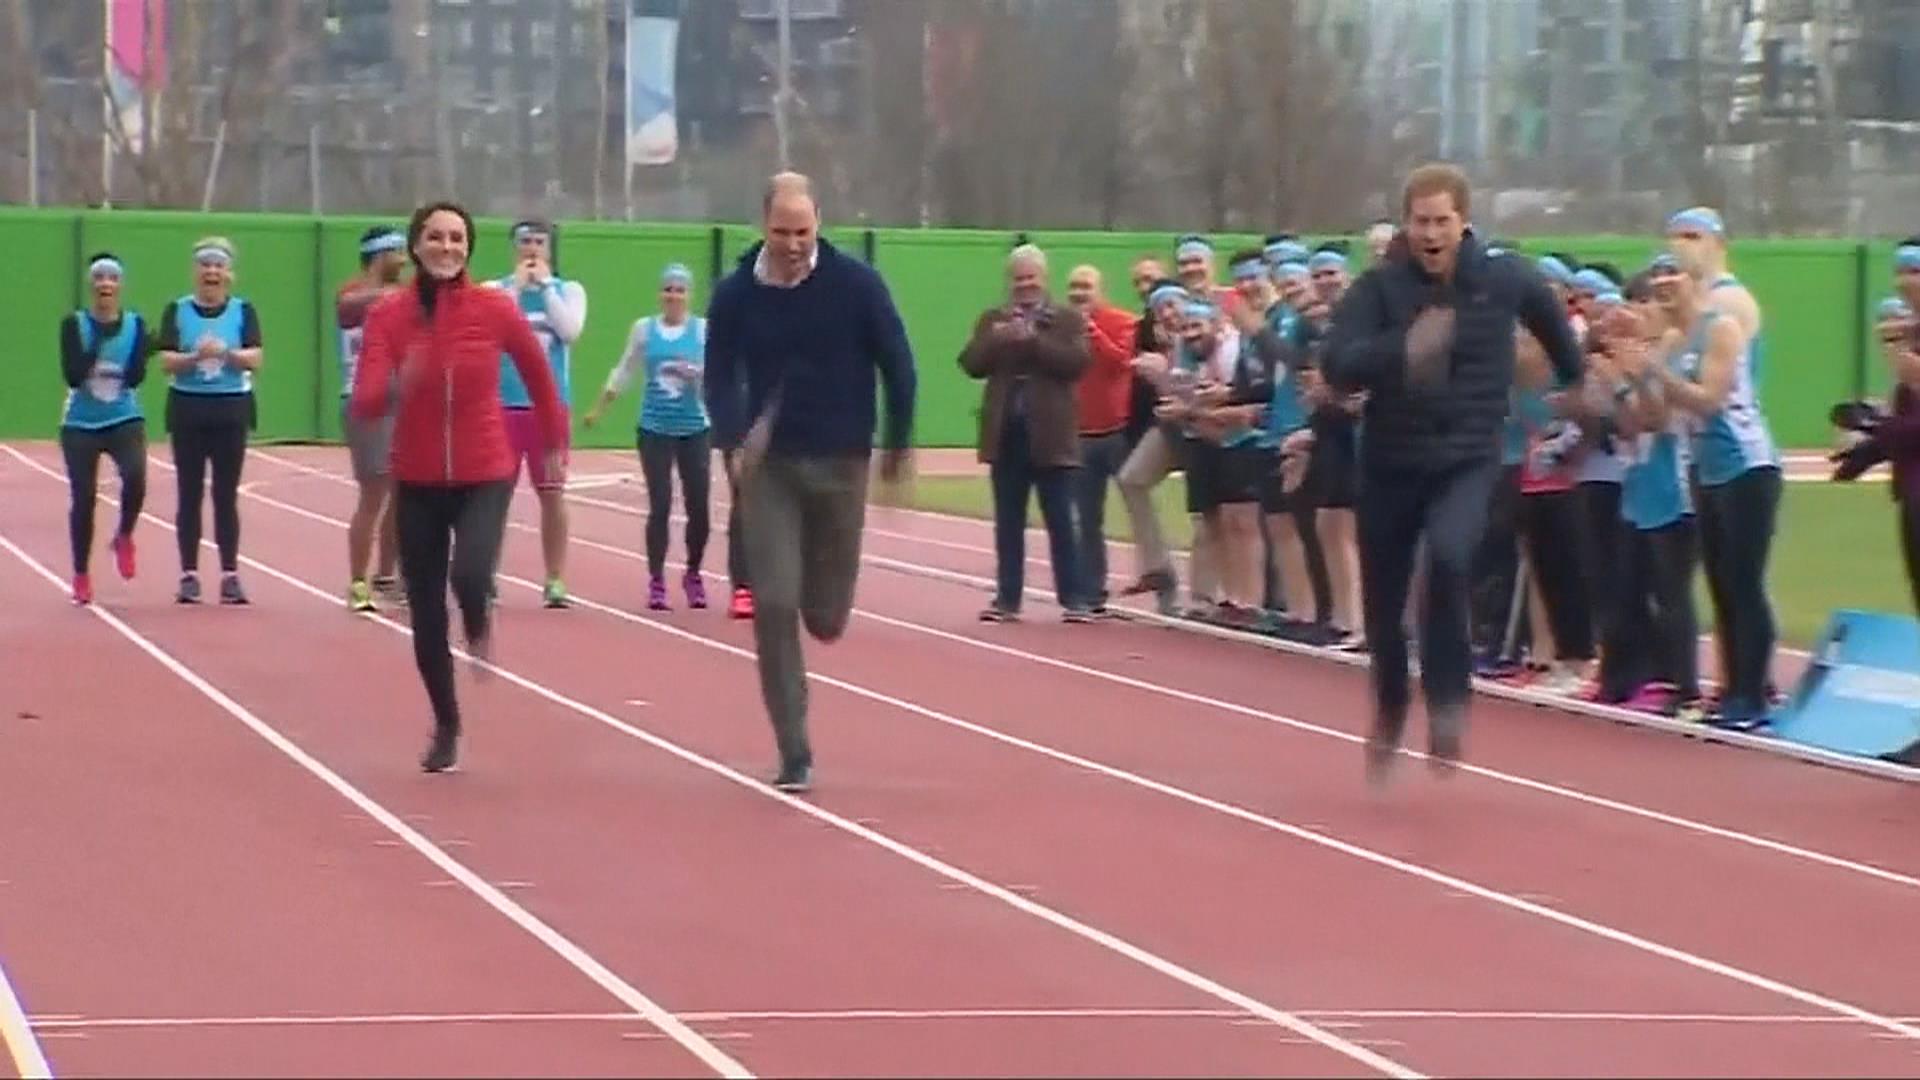 Duchess Kate is outrun by Prince William and Prince Harry in relay race